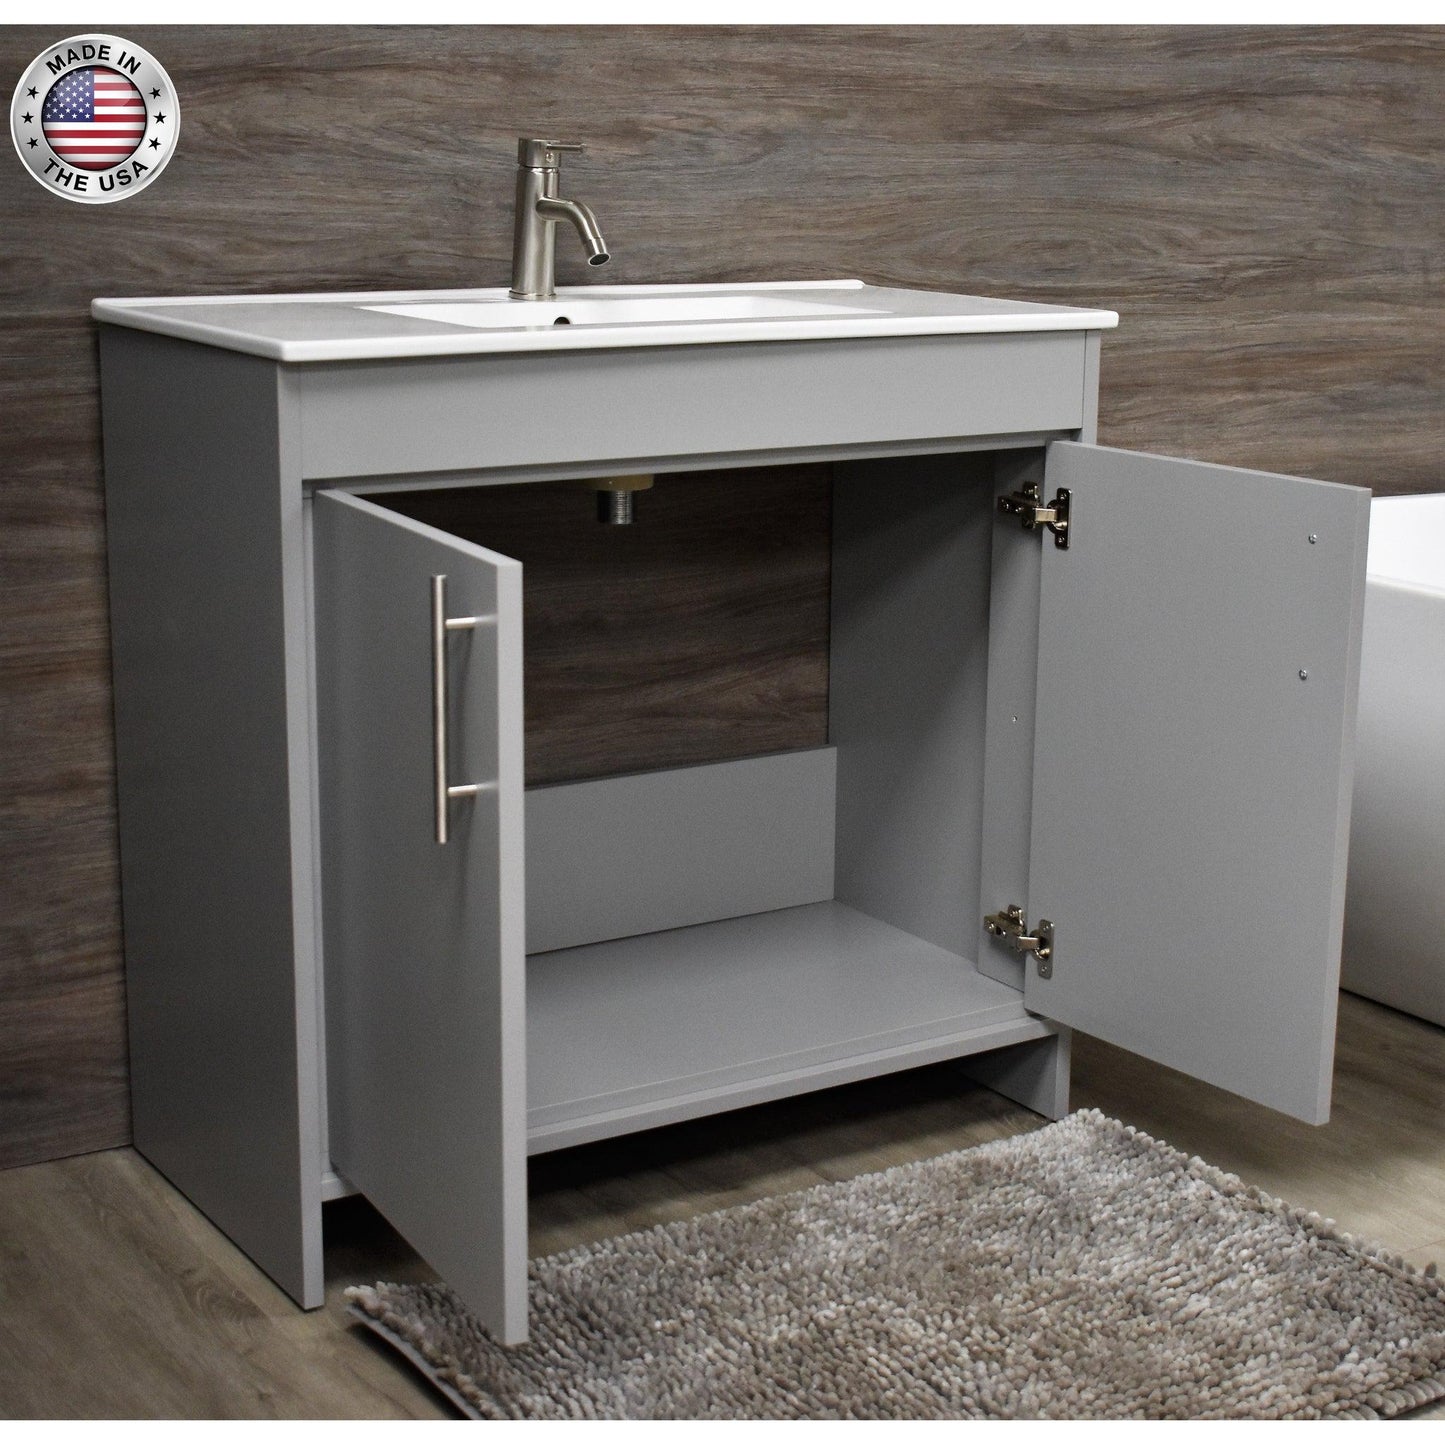 Volpa USA Villa 36" Gray Freestanding Modern Bathroom Vanity With Integrated Ceramic Top and Brushed Nickel Round Handles